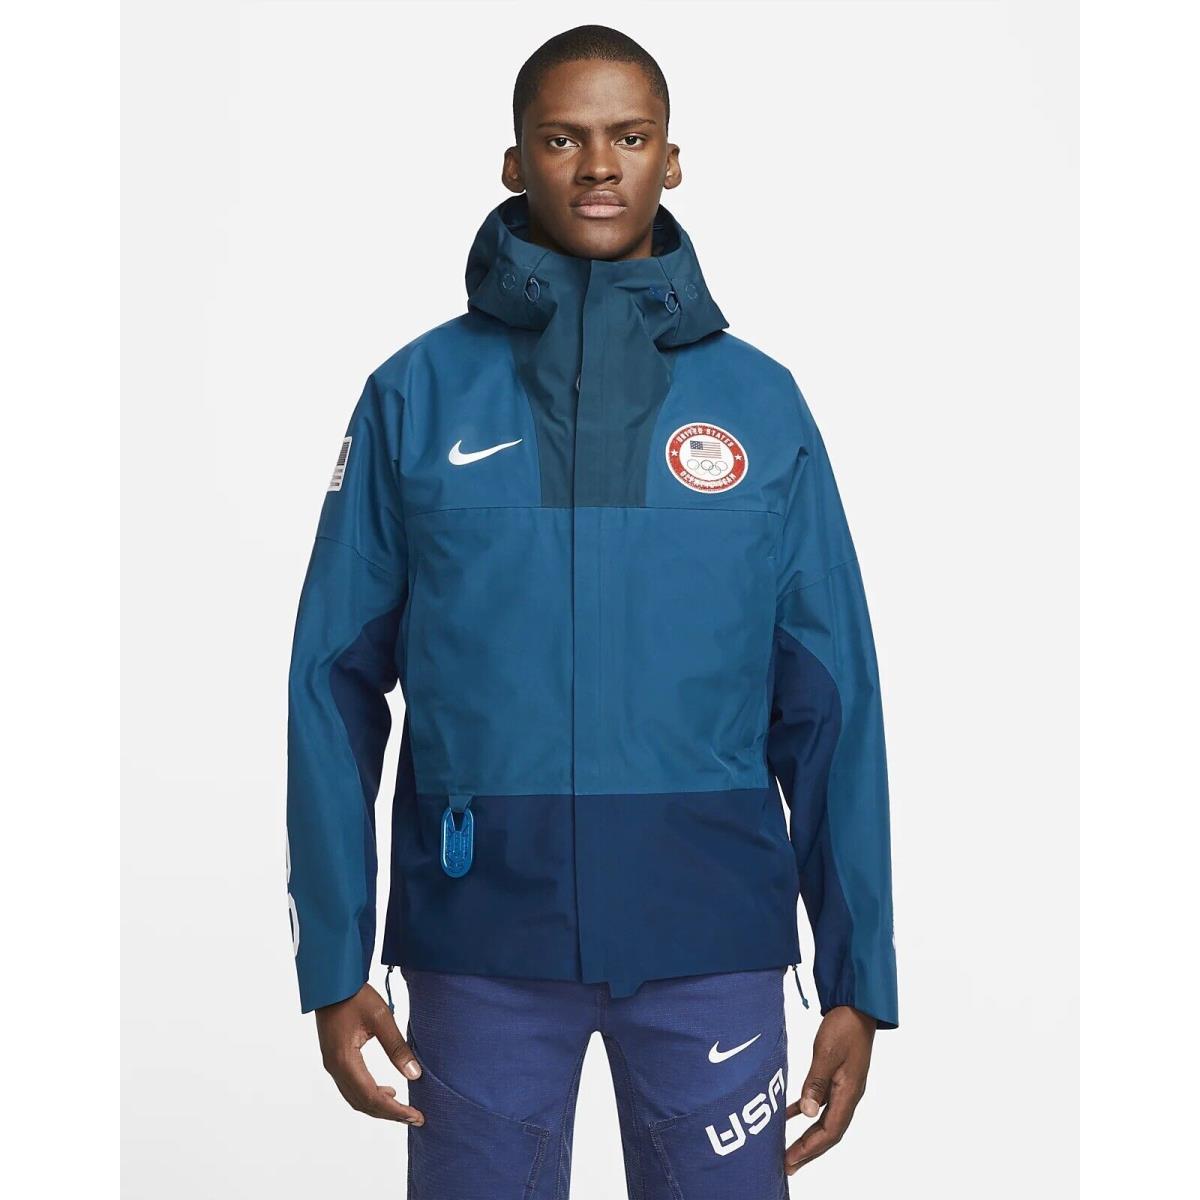 Nike Acg Usa Olympic Chain of Craters Goretex Jacket Blue Mens Small DD8845-492